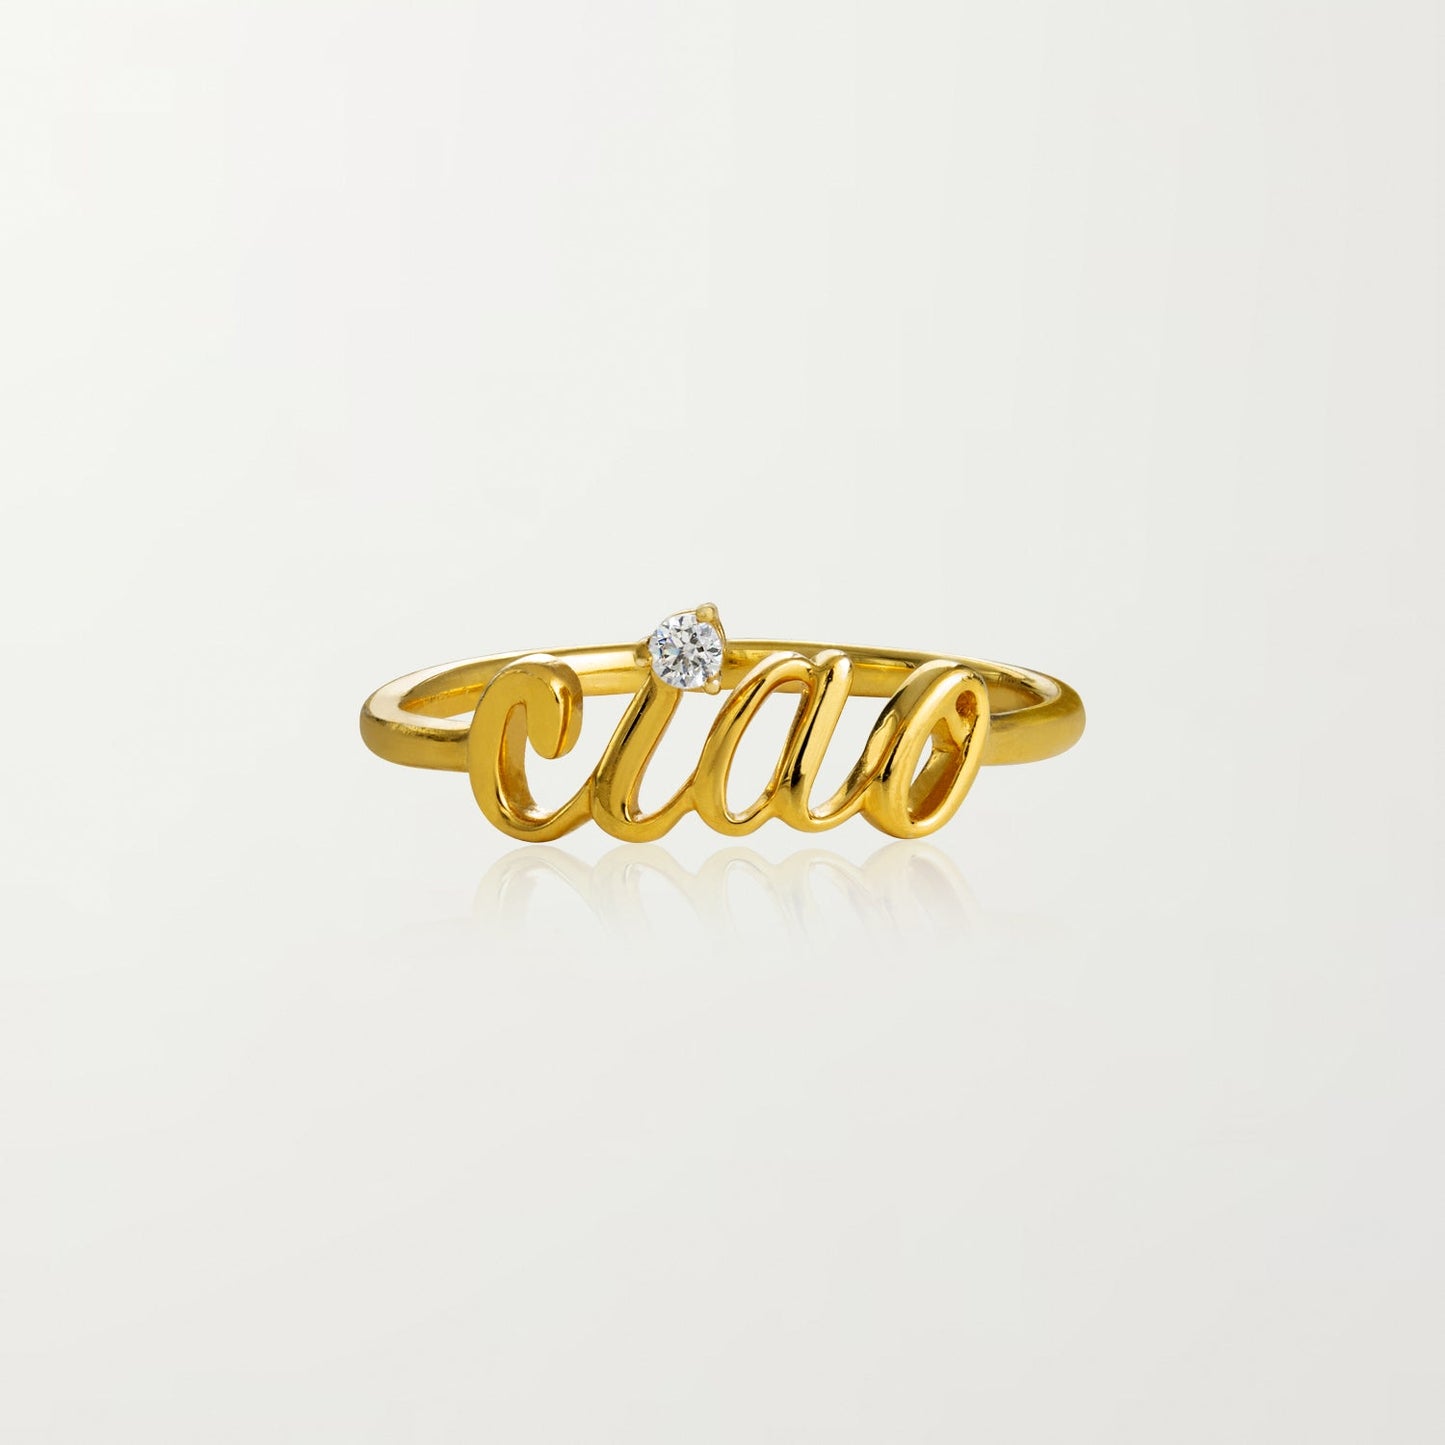 The Ciao Ring